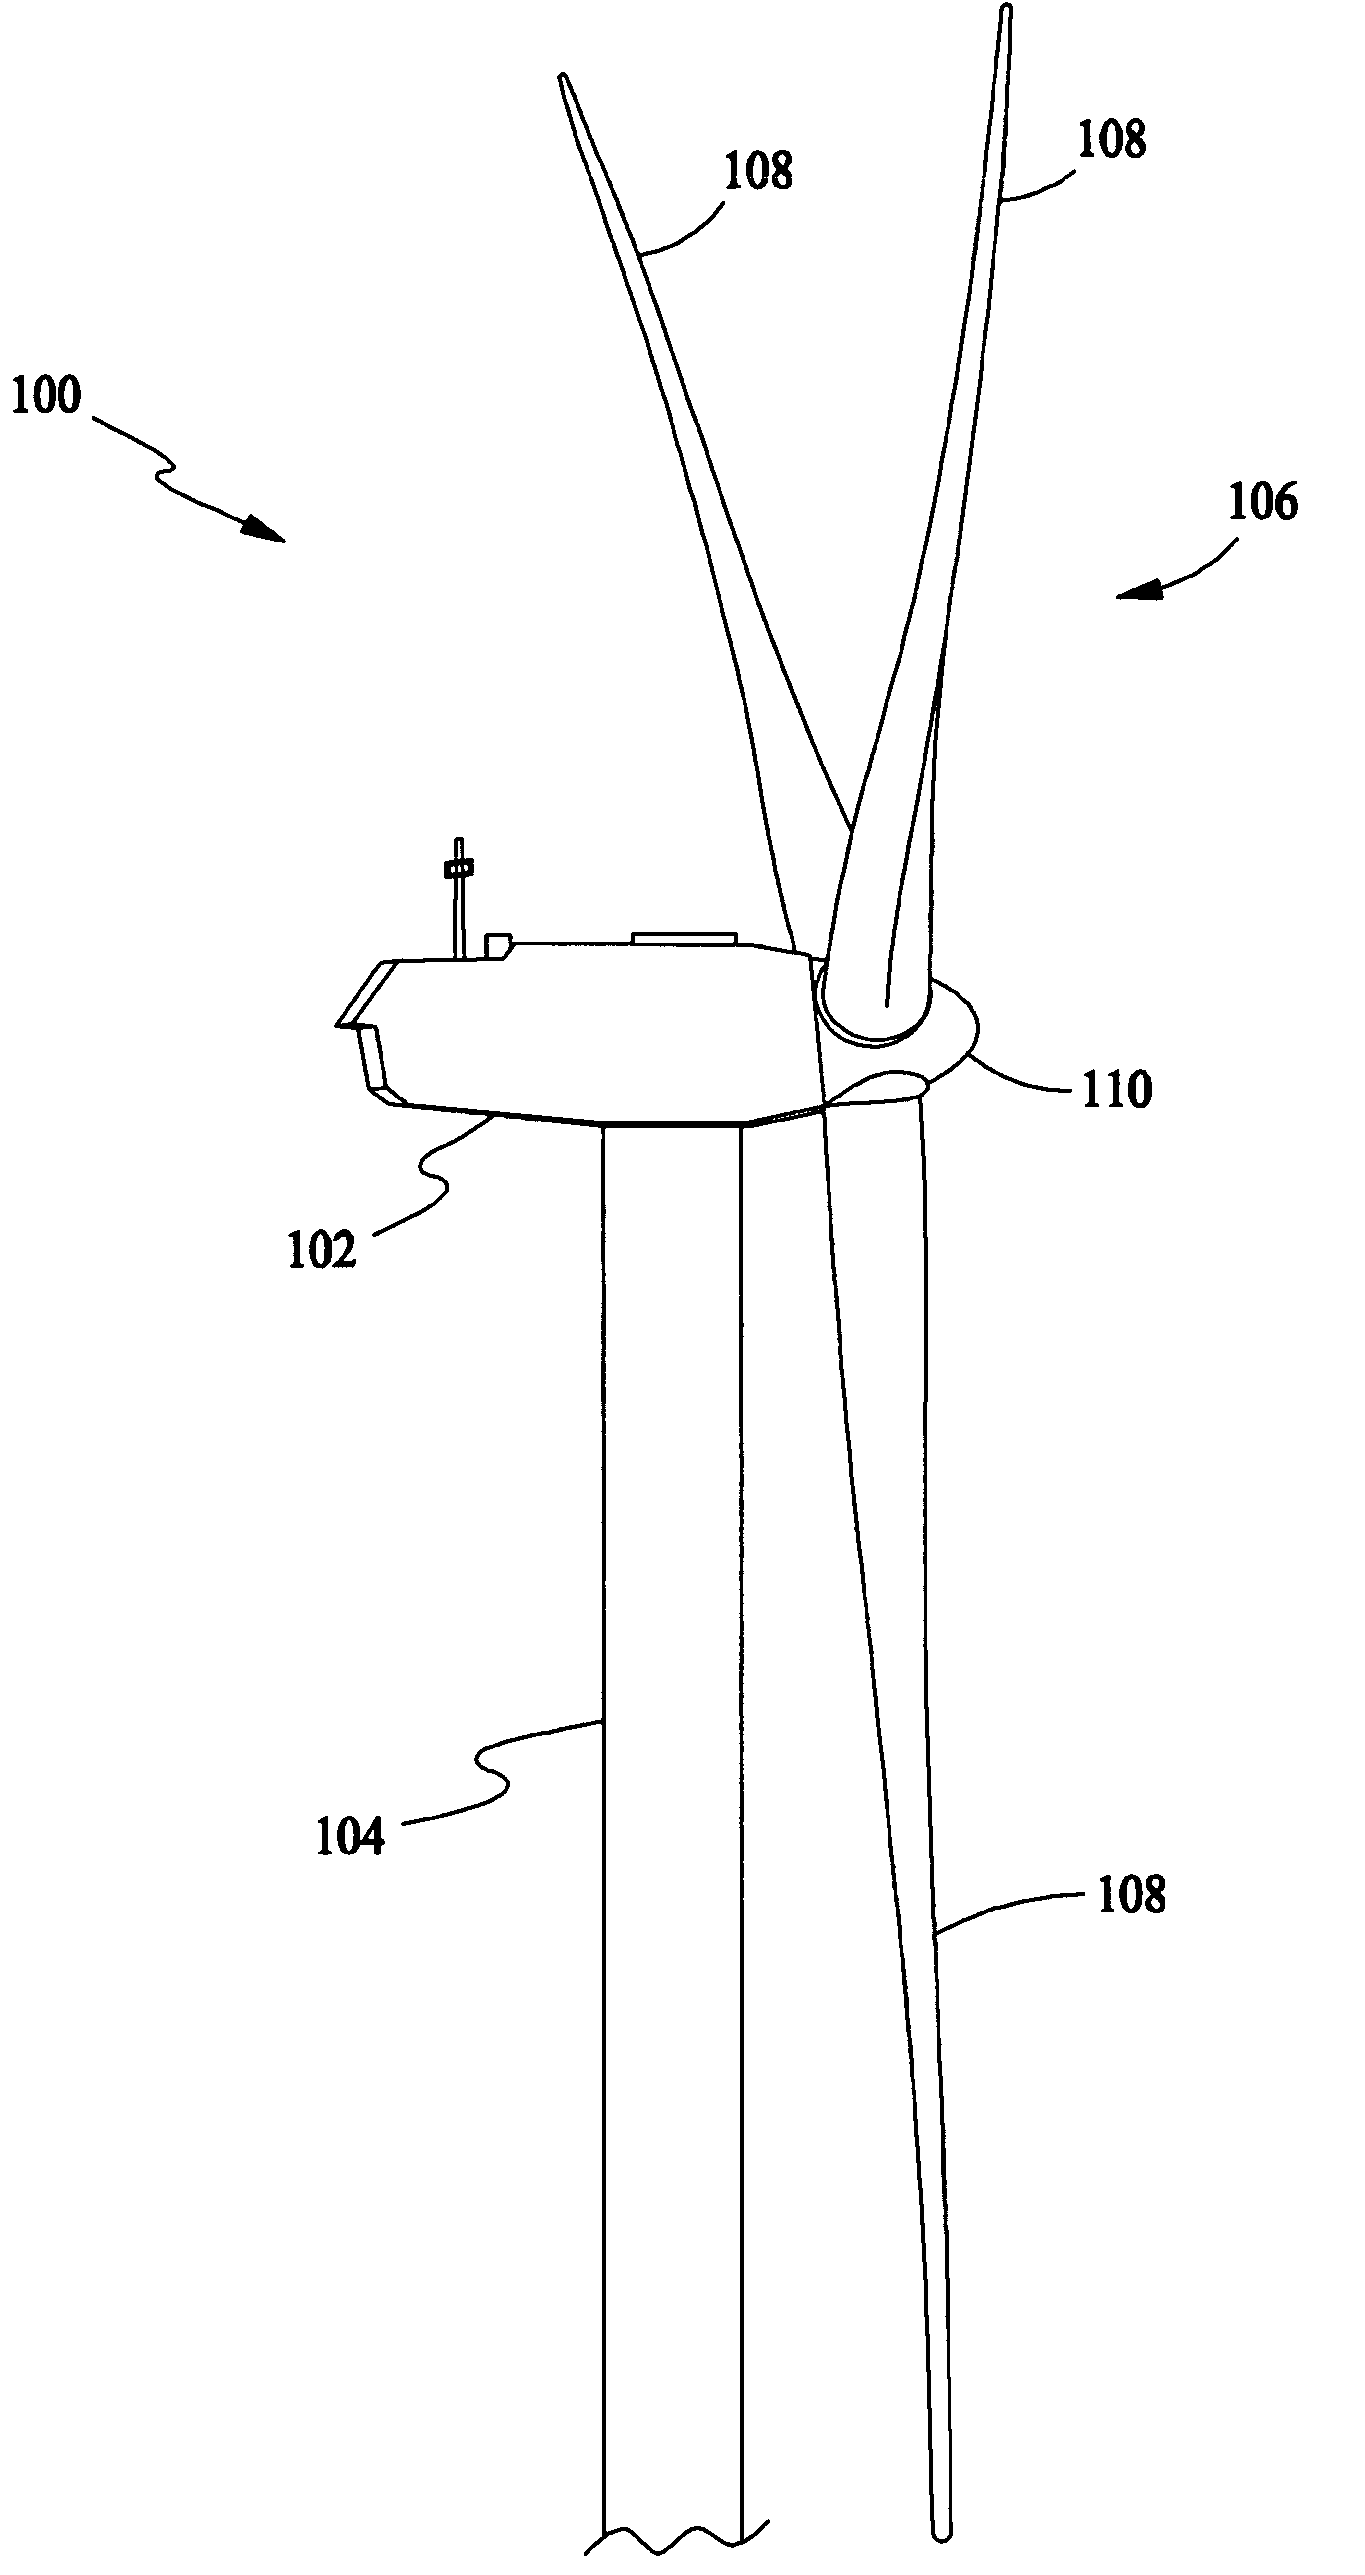 Methods and apparatus for reduction of asymmetric rotor loads in wind turbines